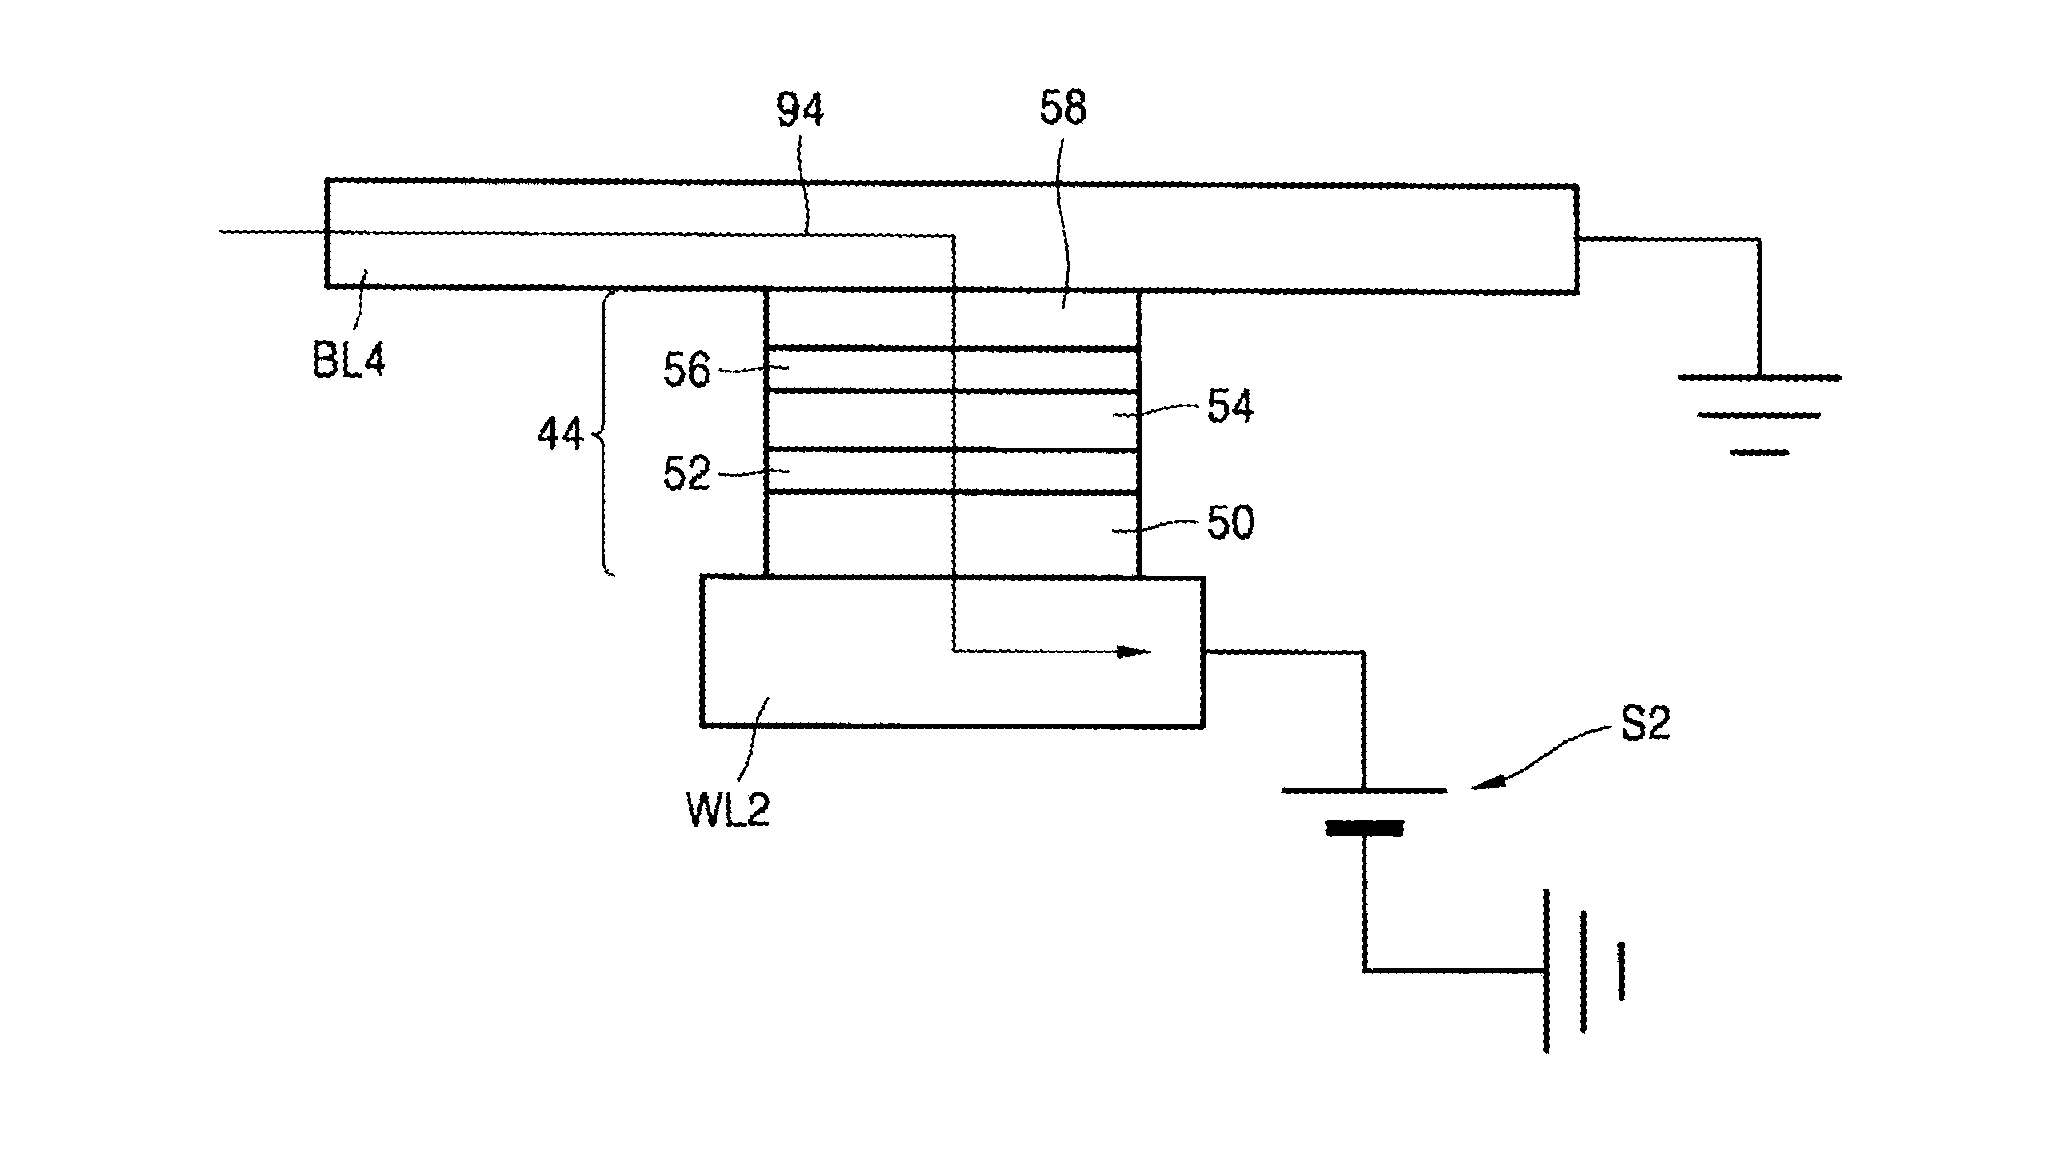 Memory device using spin hall effect and methods of manufacturing and operating the memory device